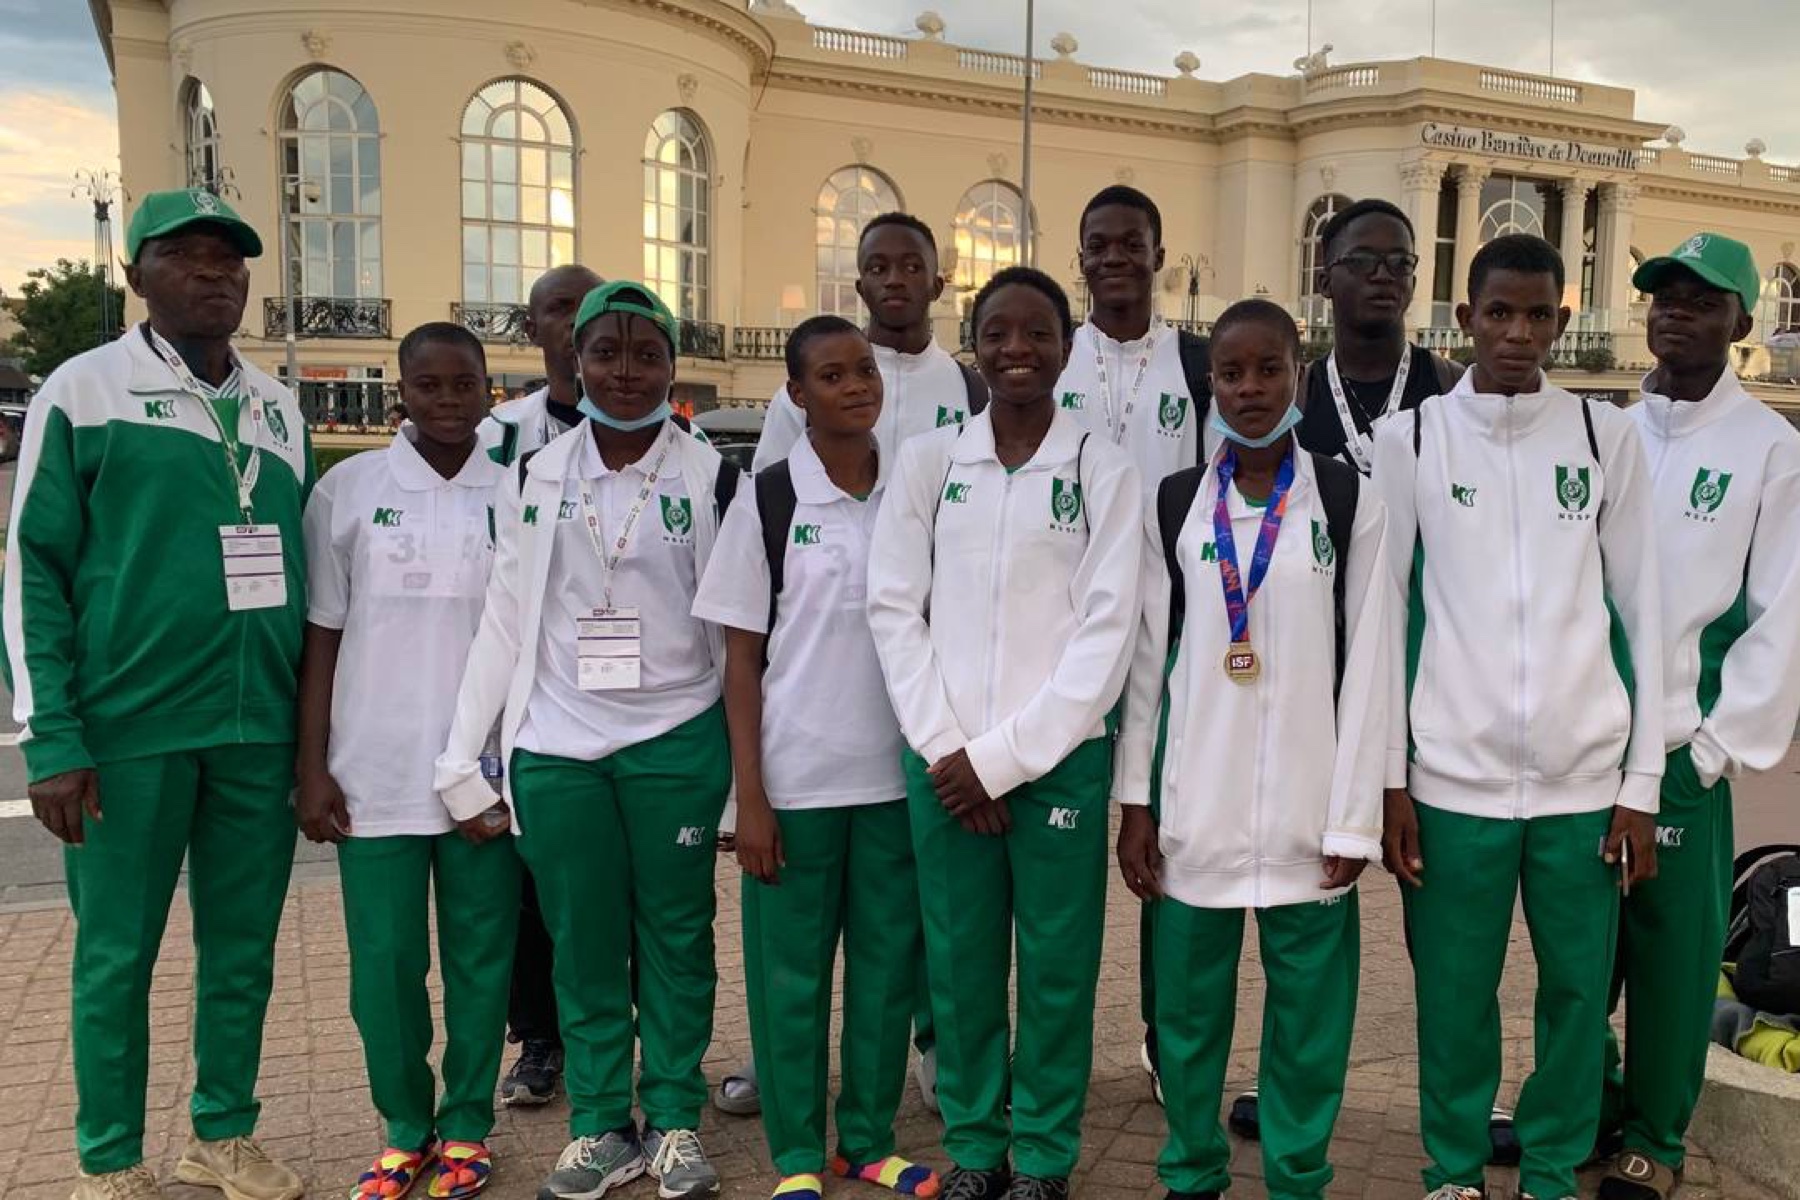 Team Nigeria at the CID in Deauville, Normandy / Photo Credit: Yomi Omogbeja for AthleticsAfrica